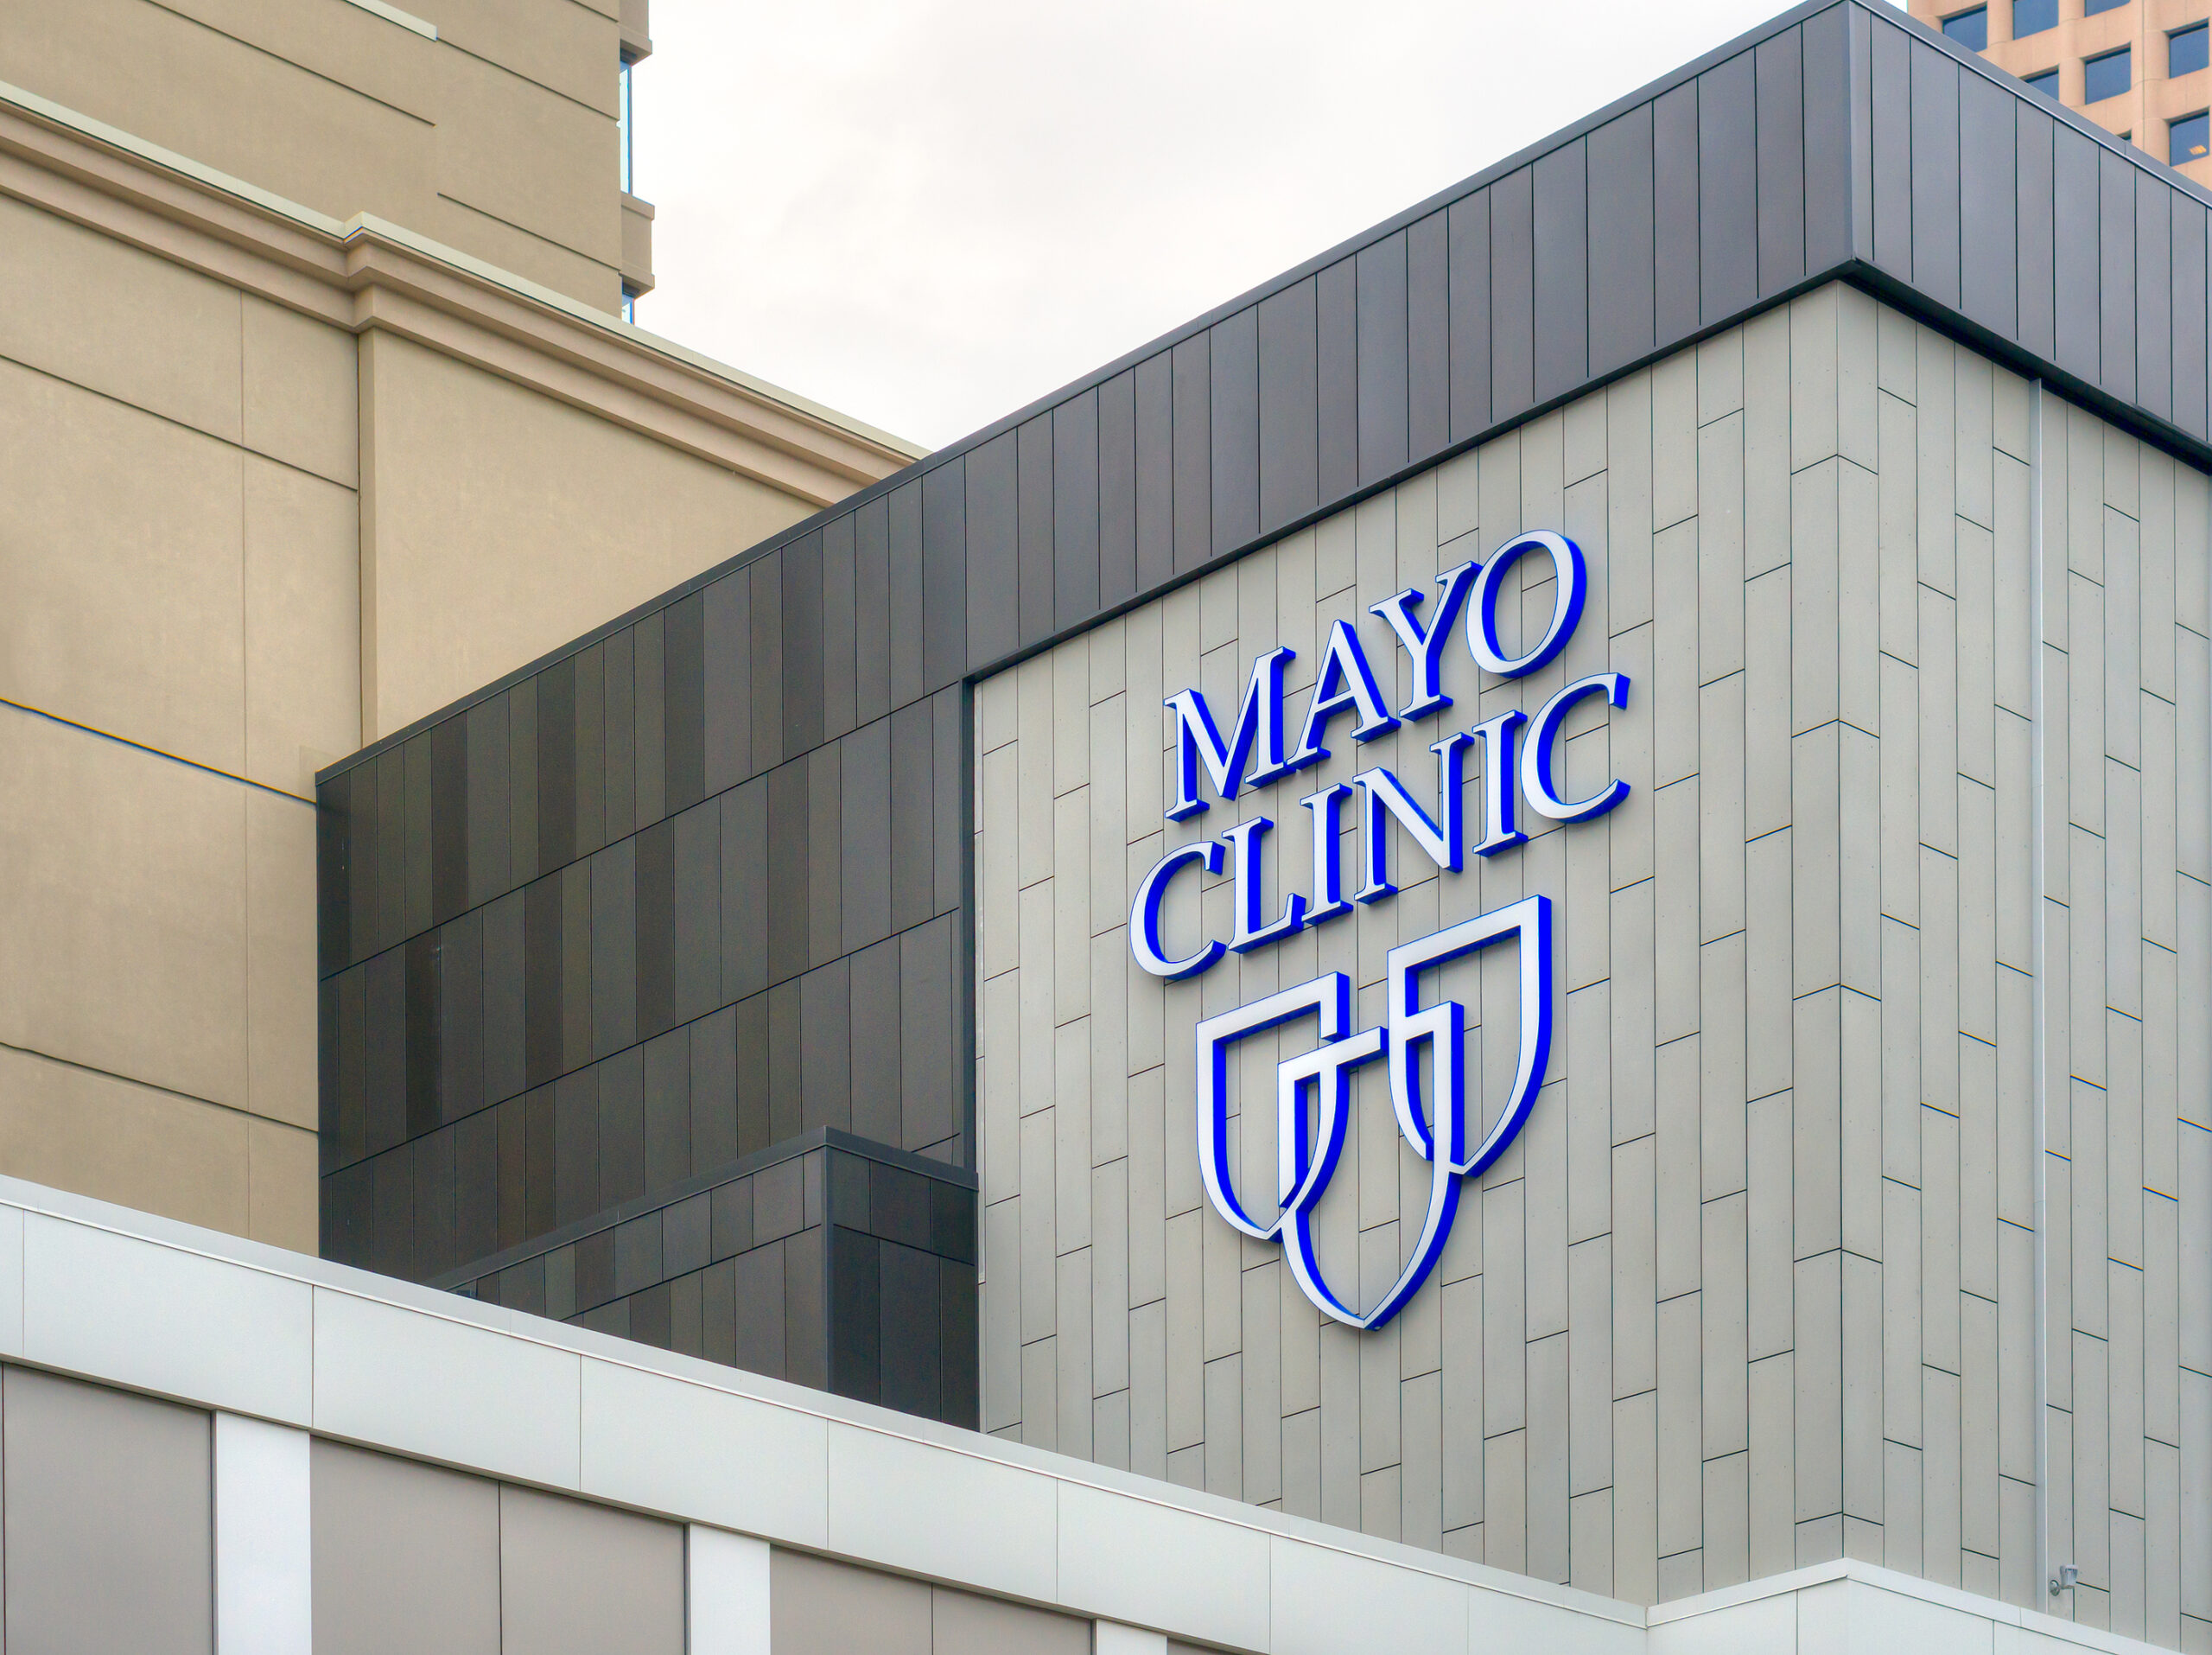 MINNEAPOLIS MN/USA - MAY 23 2016: Mayo Clinic entrance and sign. The Mayo Clinic is a nonprofit medical practice and medical research group based in Rochester Minnesota.